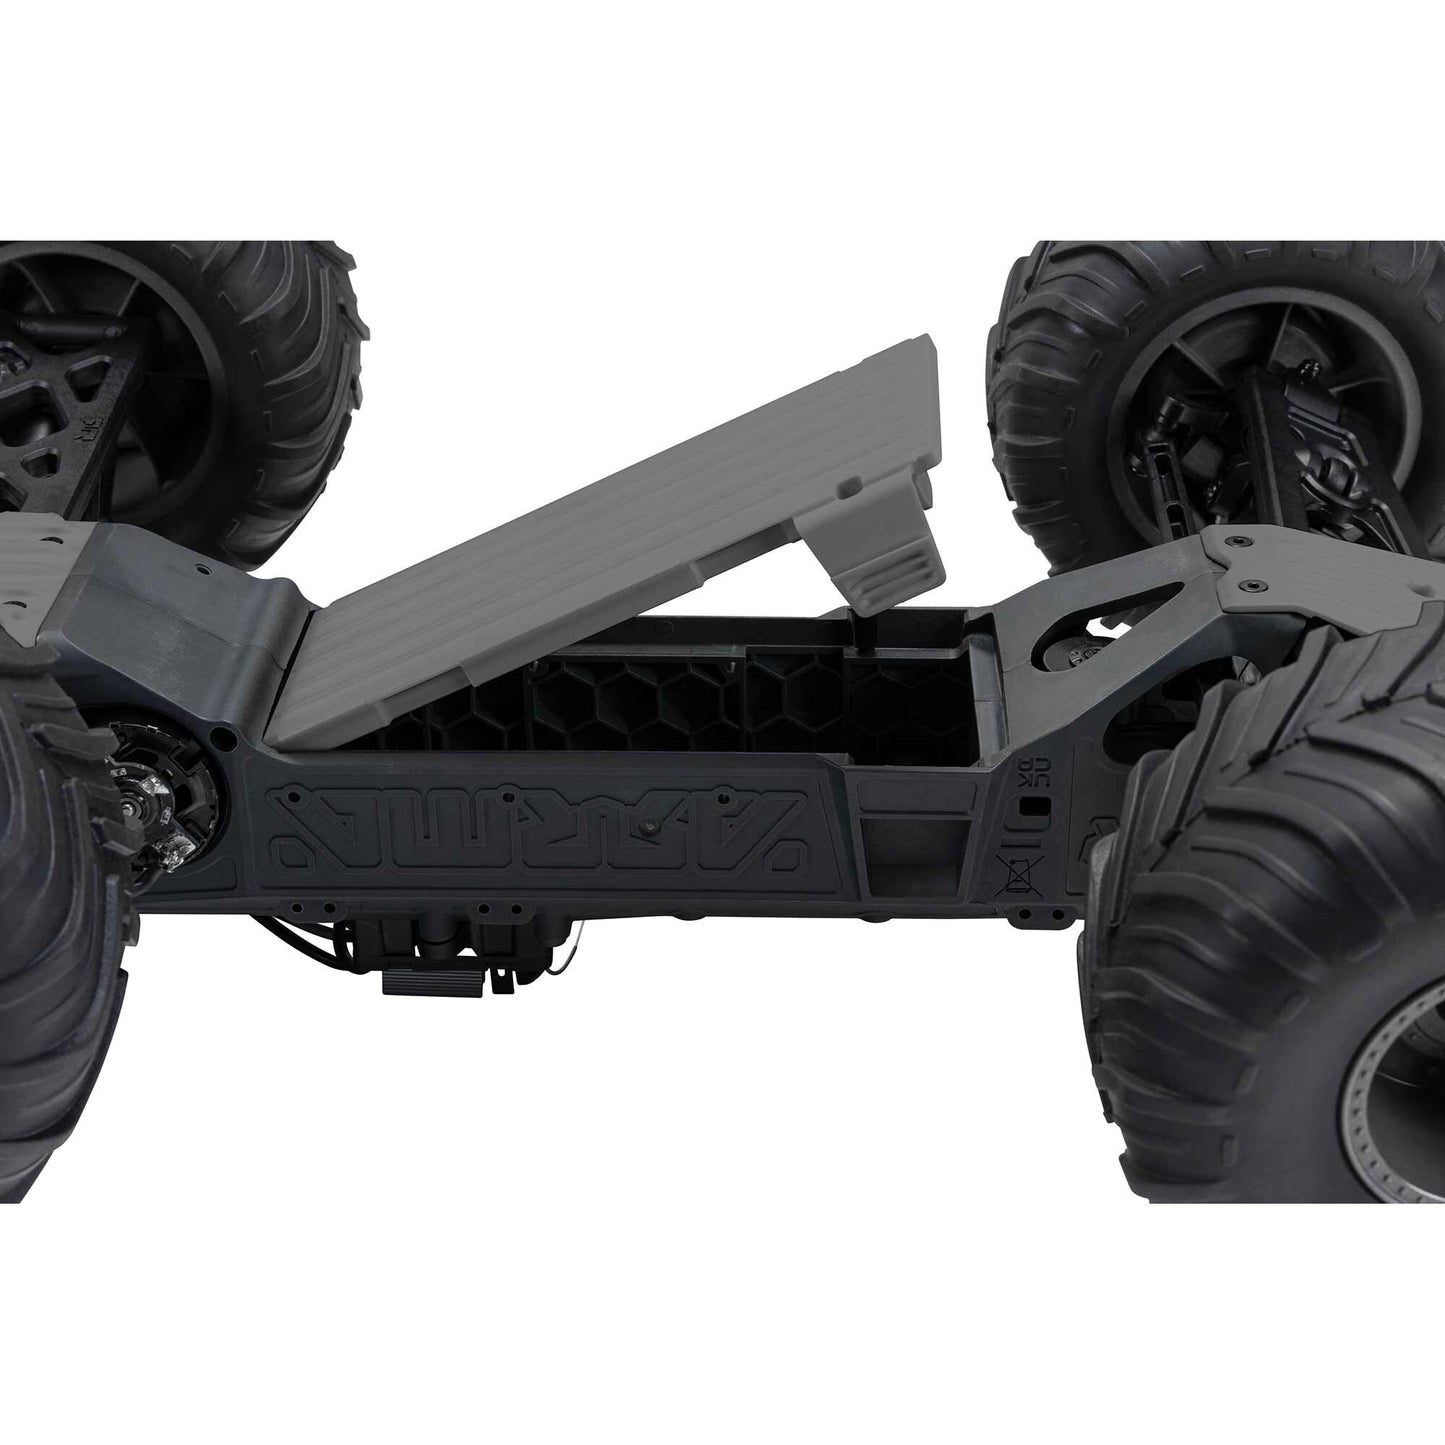 GORGON 4X2 Monster Truck Ready-To-Assemble KIT with Battery & Charger